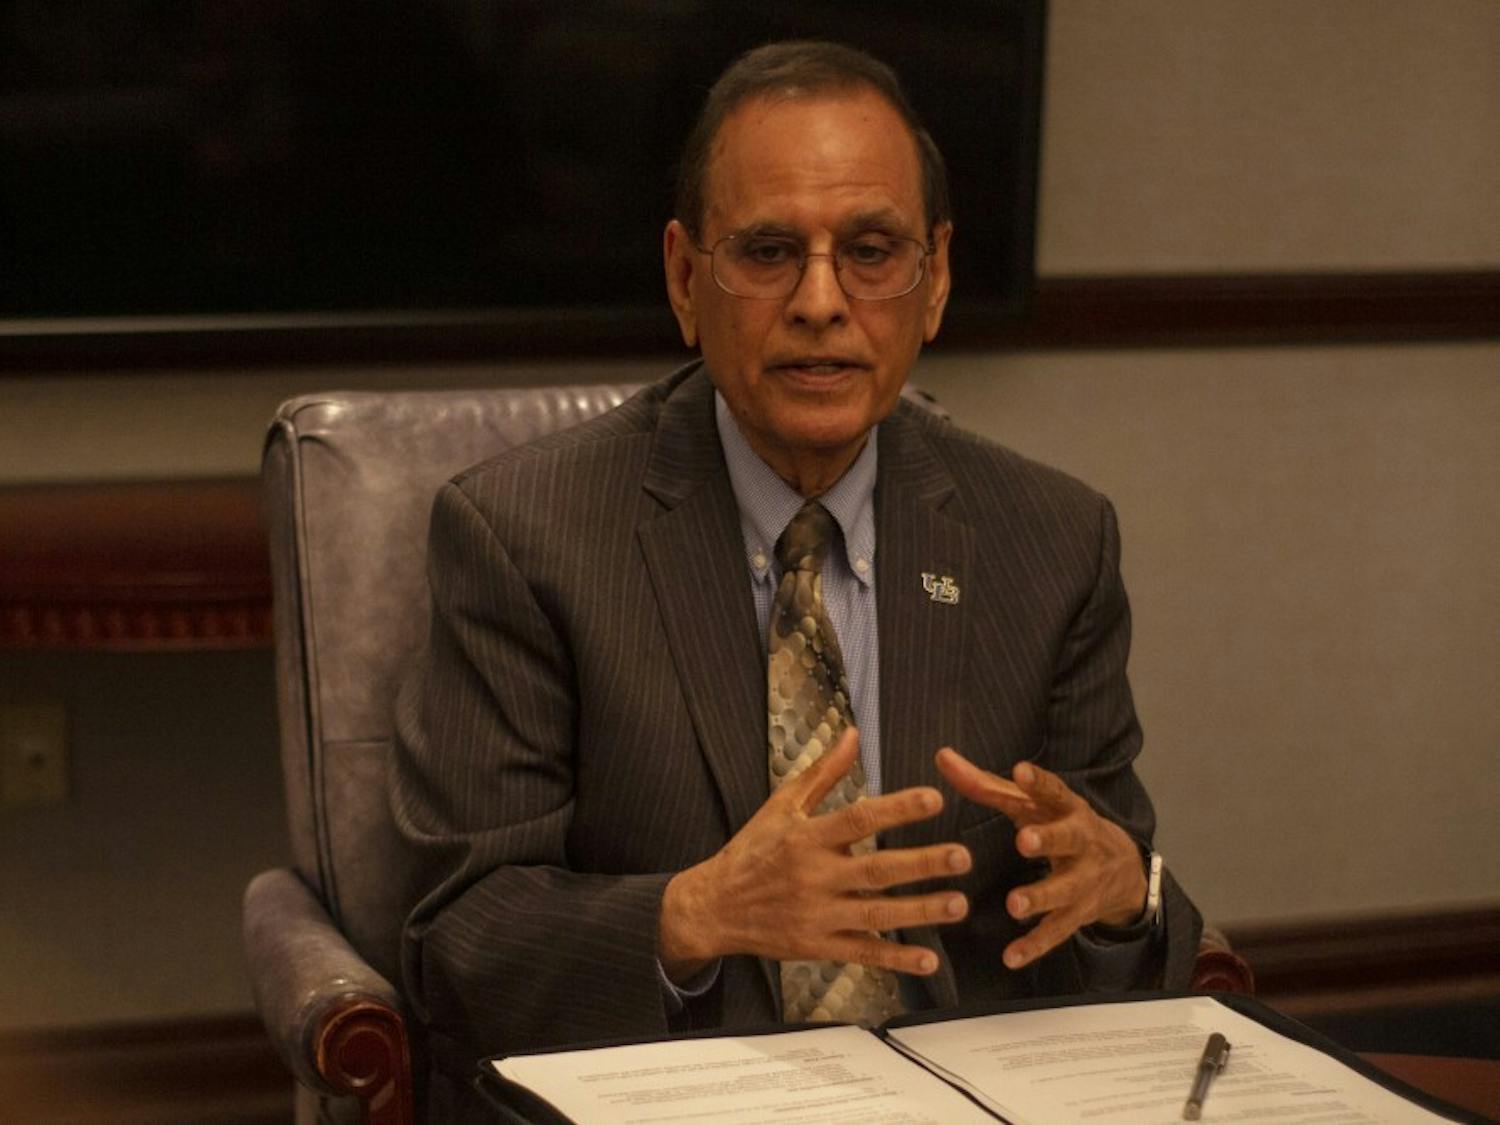 The Spectrum sat down with UB President Satish Tripathi on Monday to discuss fall 2021 campus COVID-19 protocols, the UB Foundation and improving faculty diversity&nbsp;